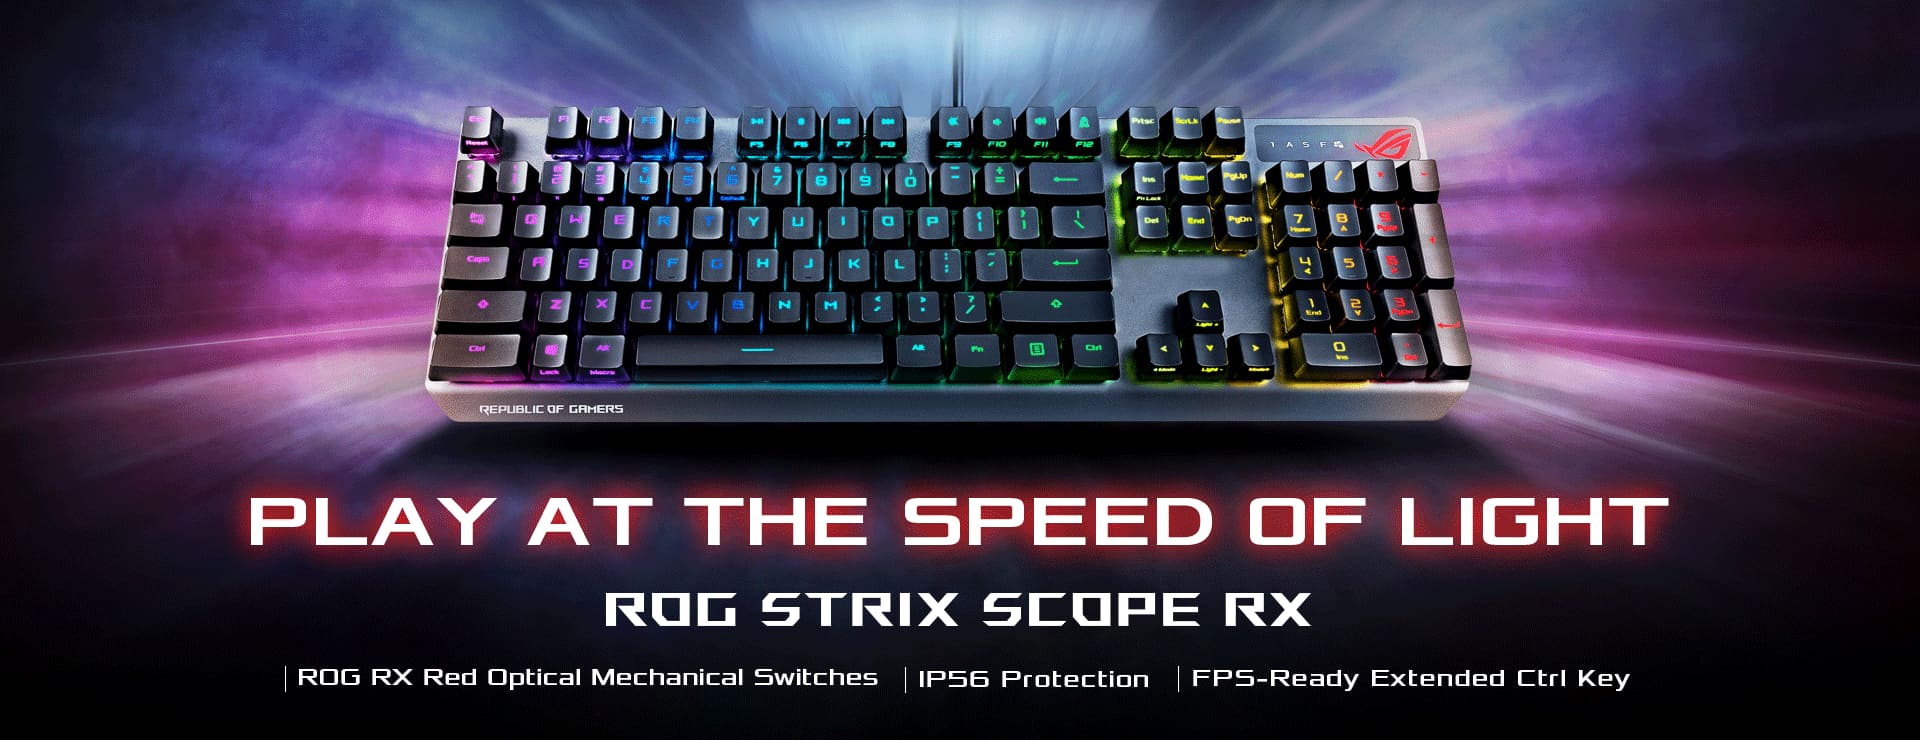 ROG Strix Scope RX Keyboard product photo with a RX switch icon